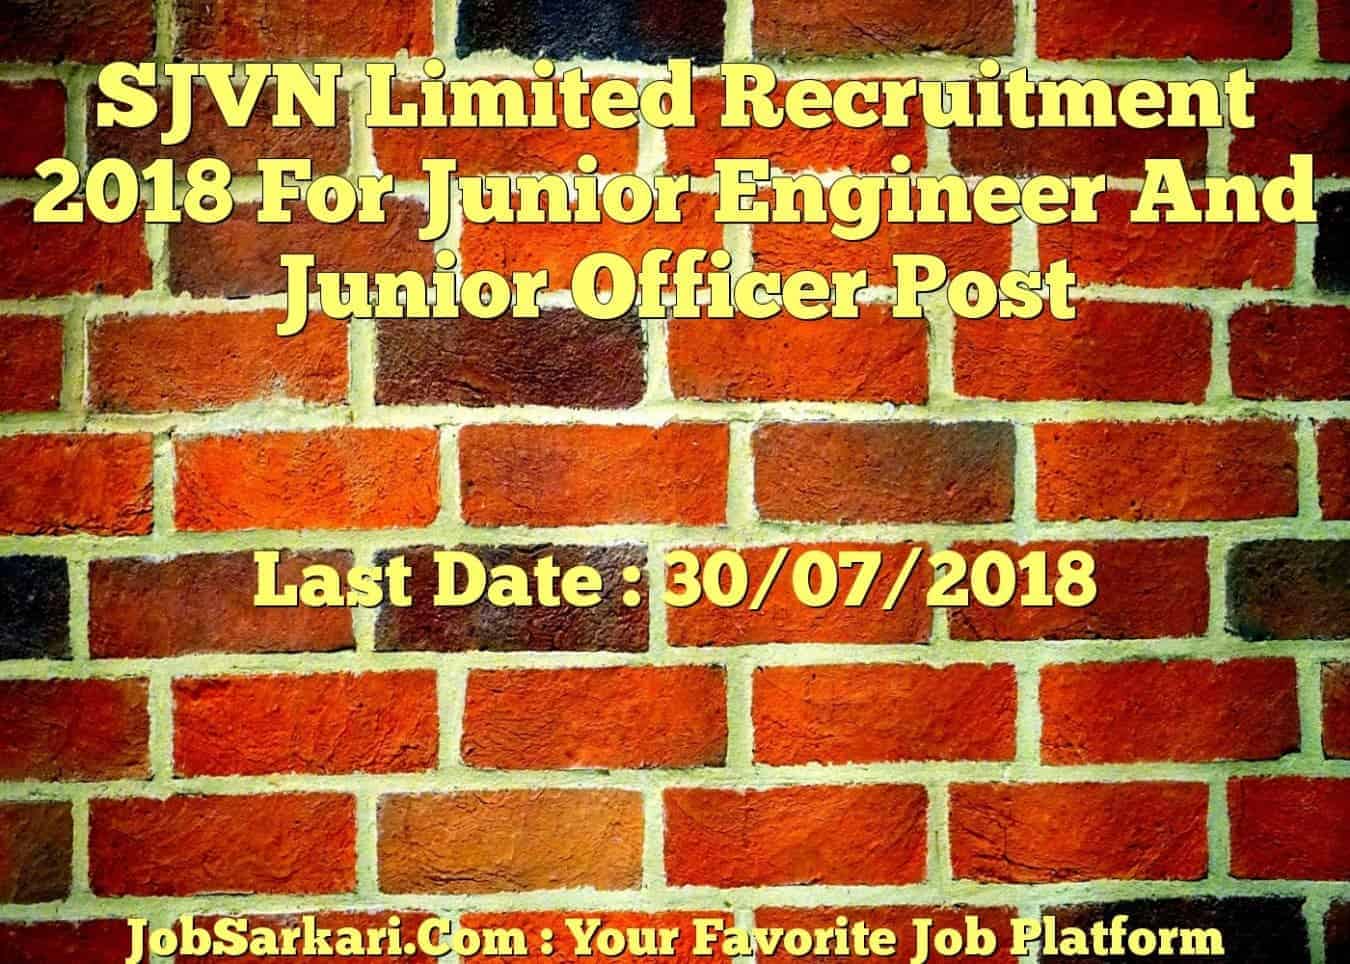 SJVN Limited Recruitment 2018 For Junior Engineer And Junior Officer Post